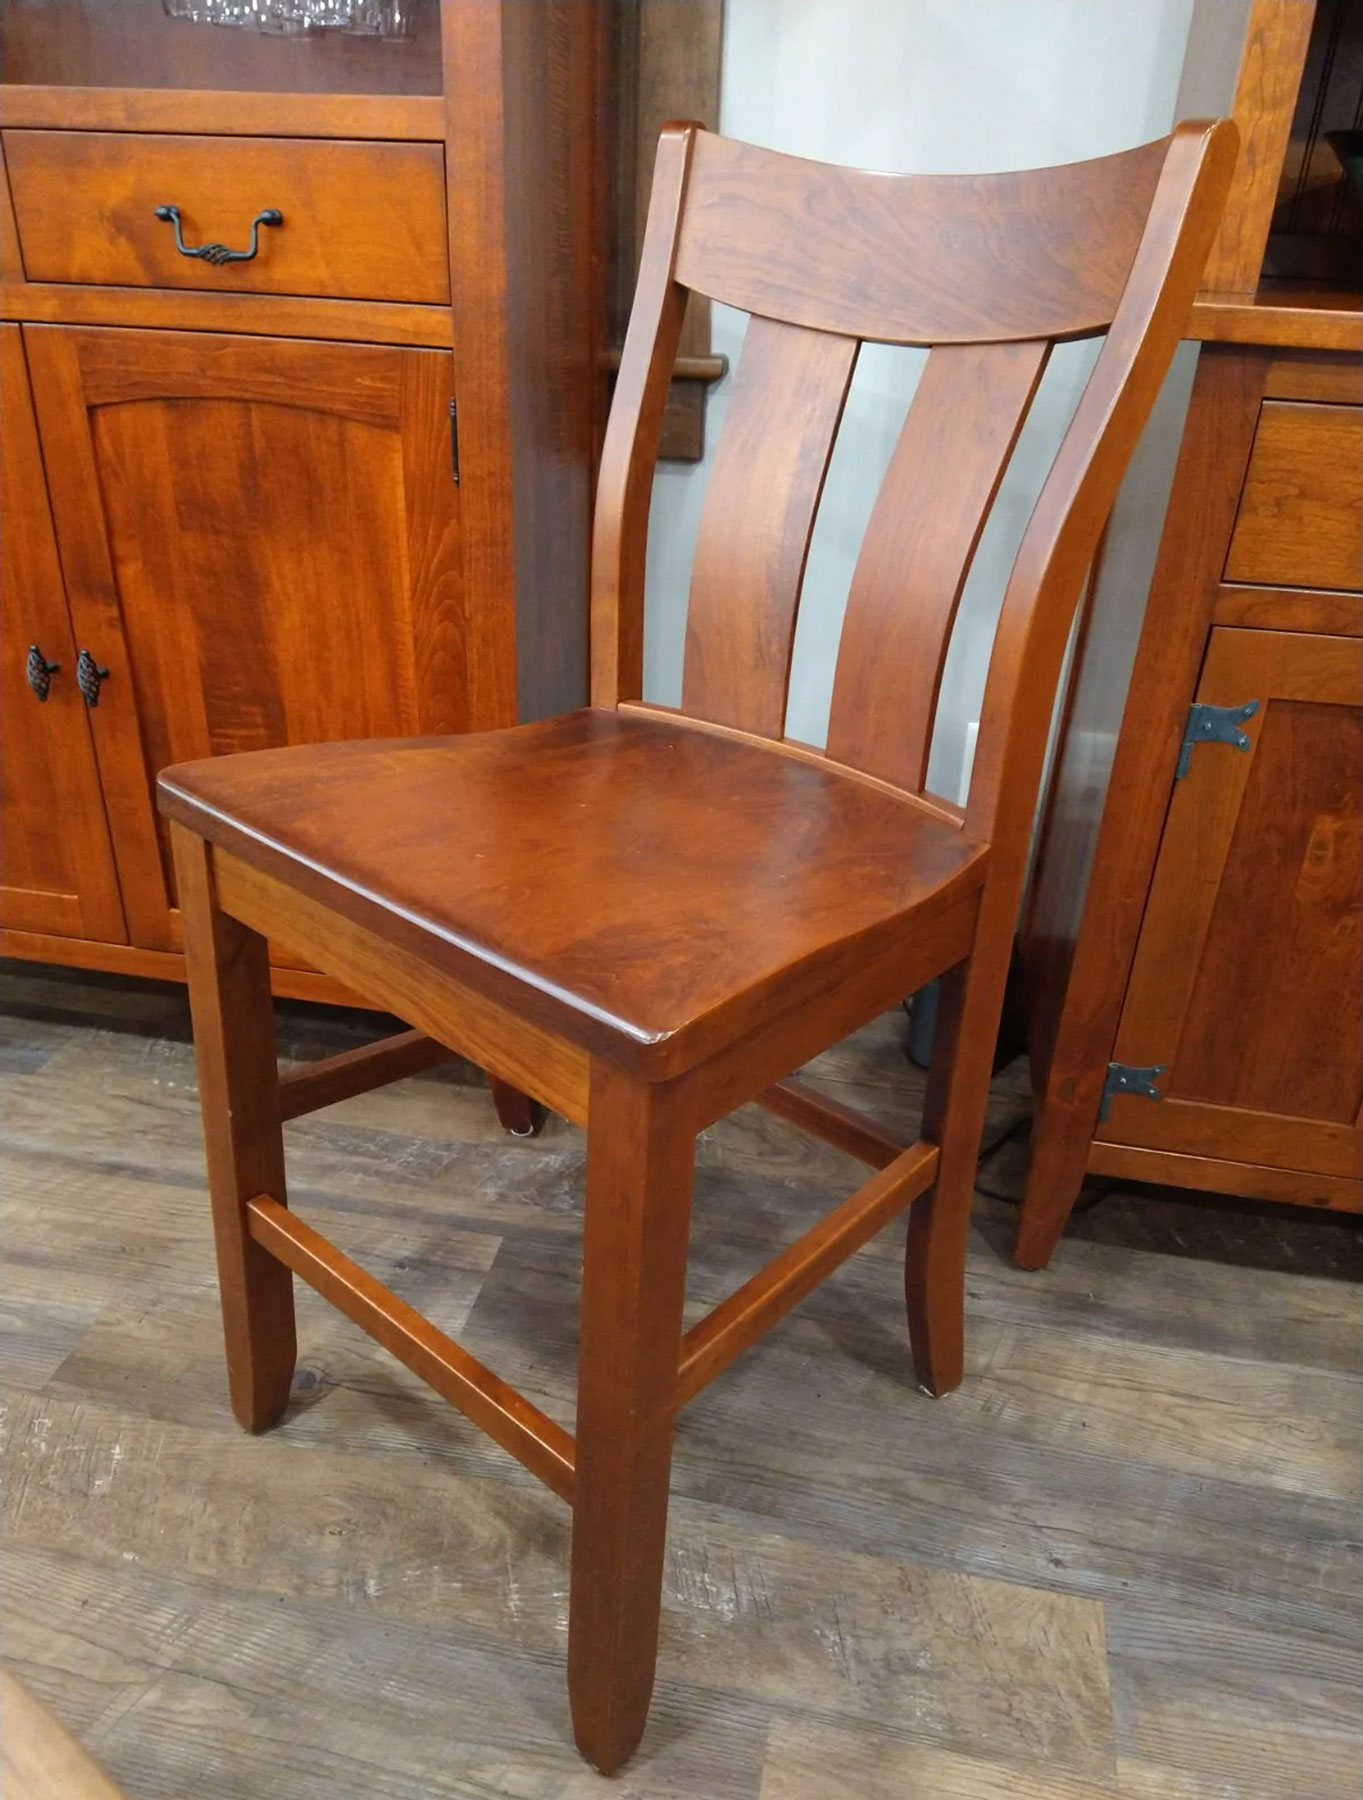 Richfield 24 inch Counter Height Chair in Rustic Cherry